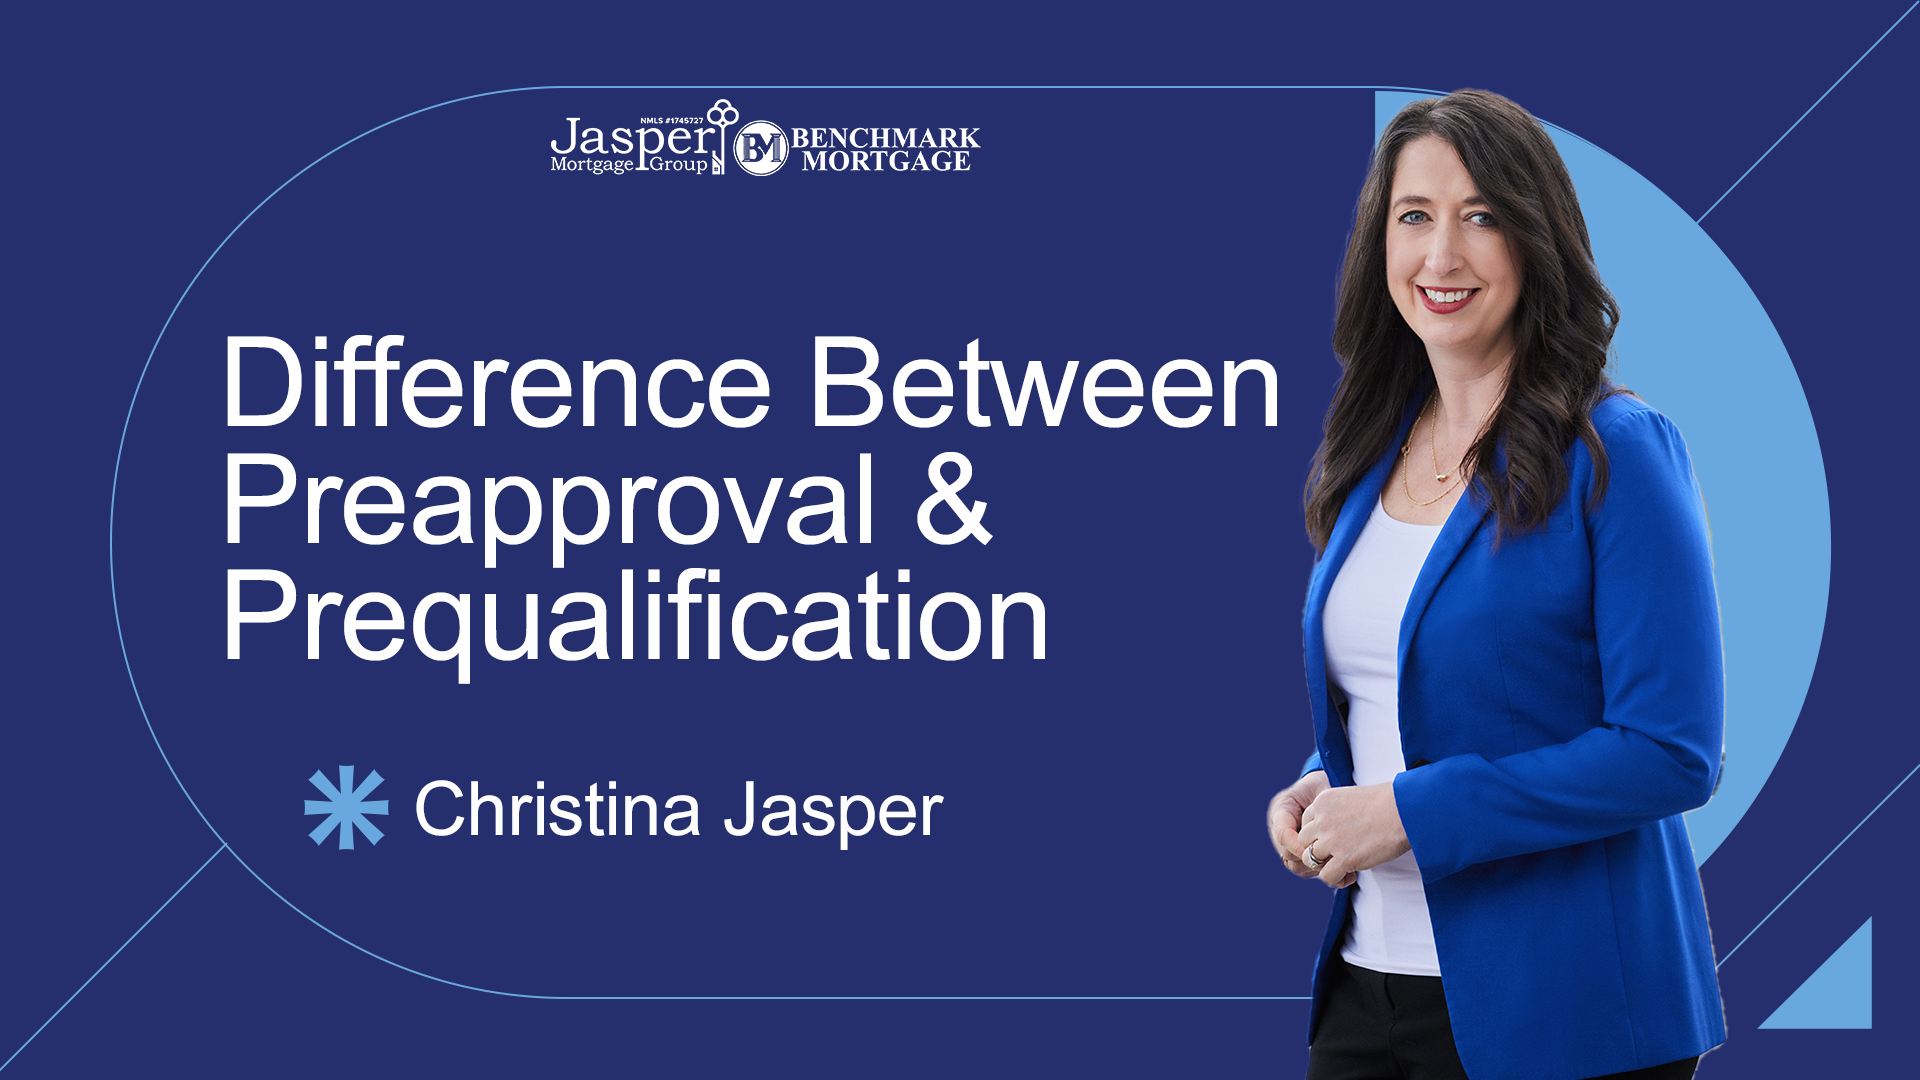 Difference Between Preapproval & Prequalification